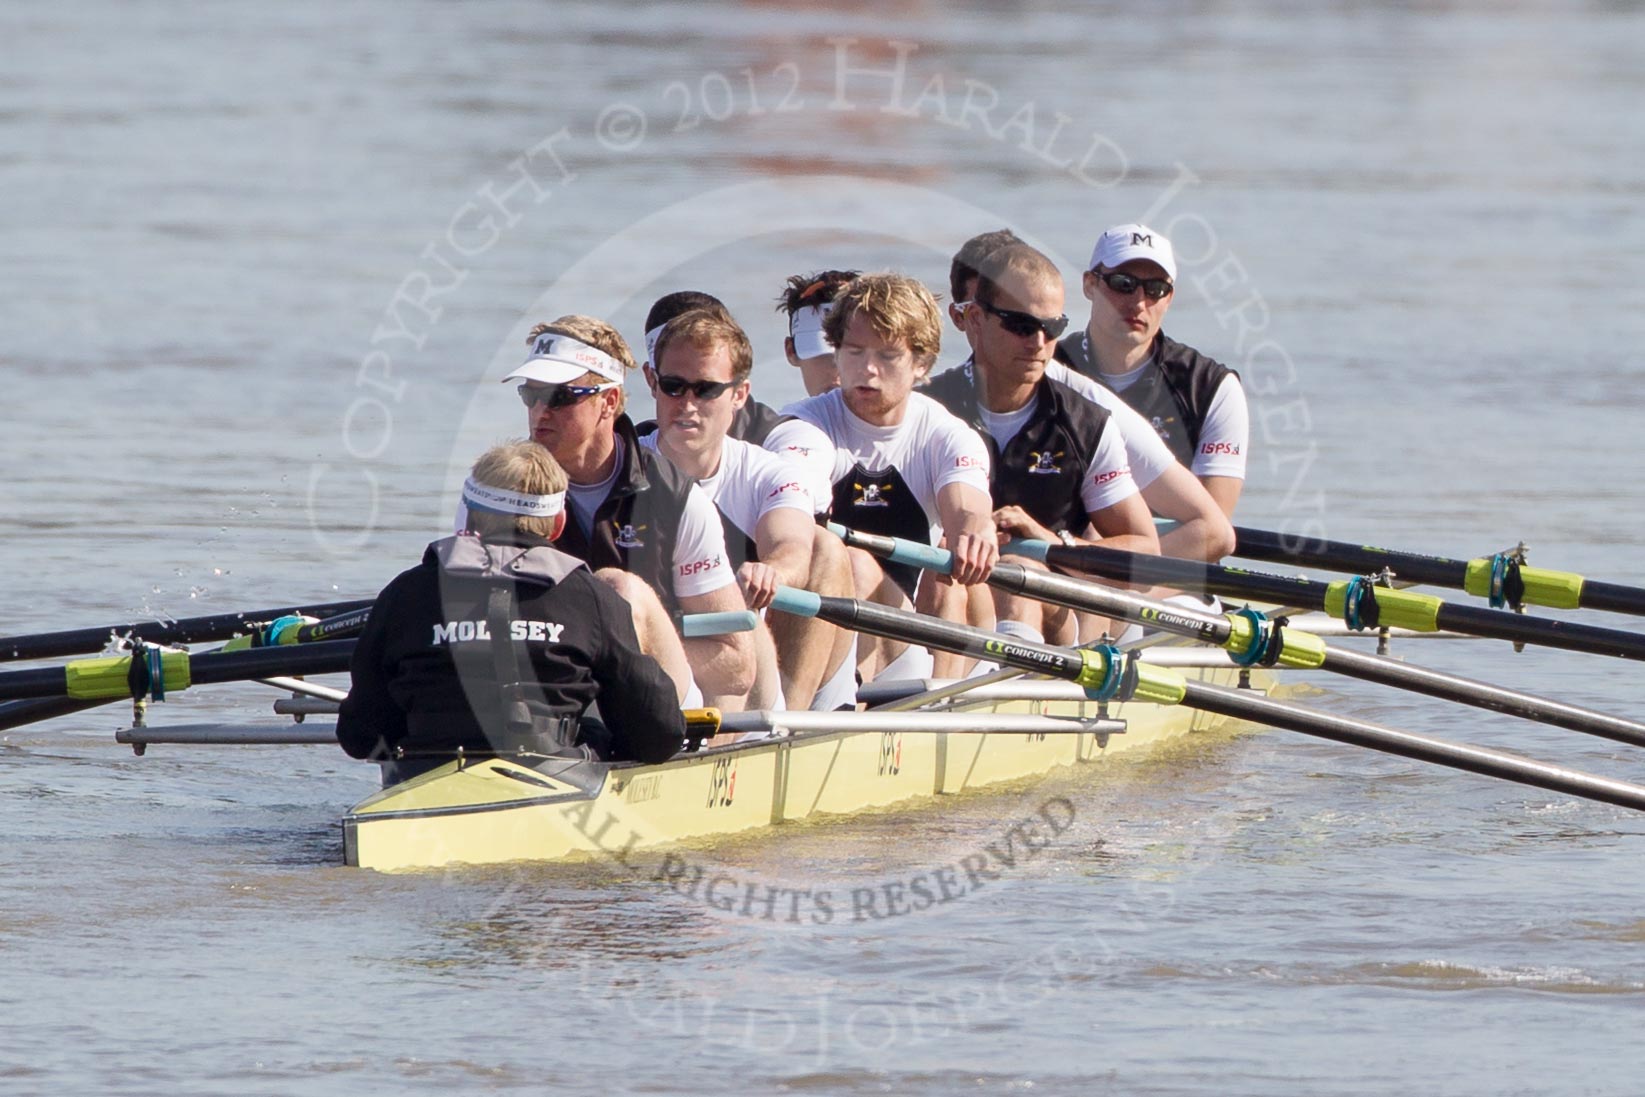 The Boat Race season 2012 - fixture CUBC vs Molesey BC.




on 25 March 2012 at 14:40, image #18